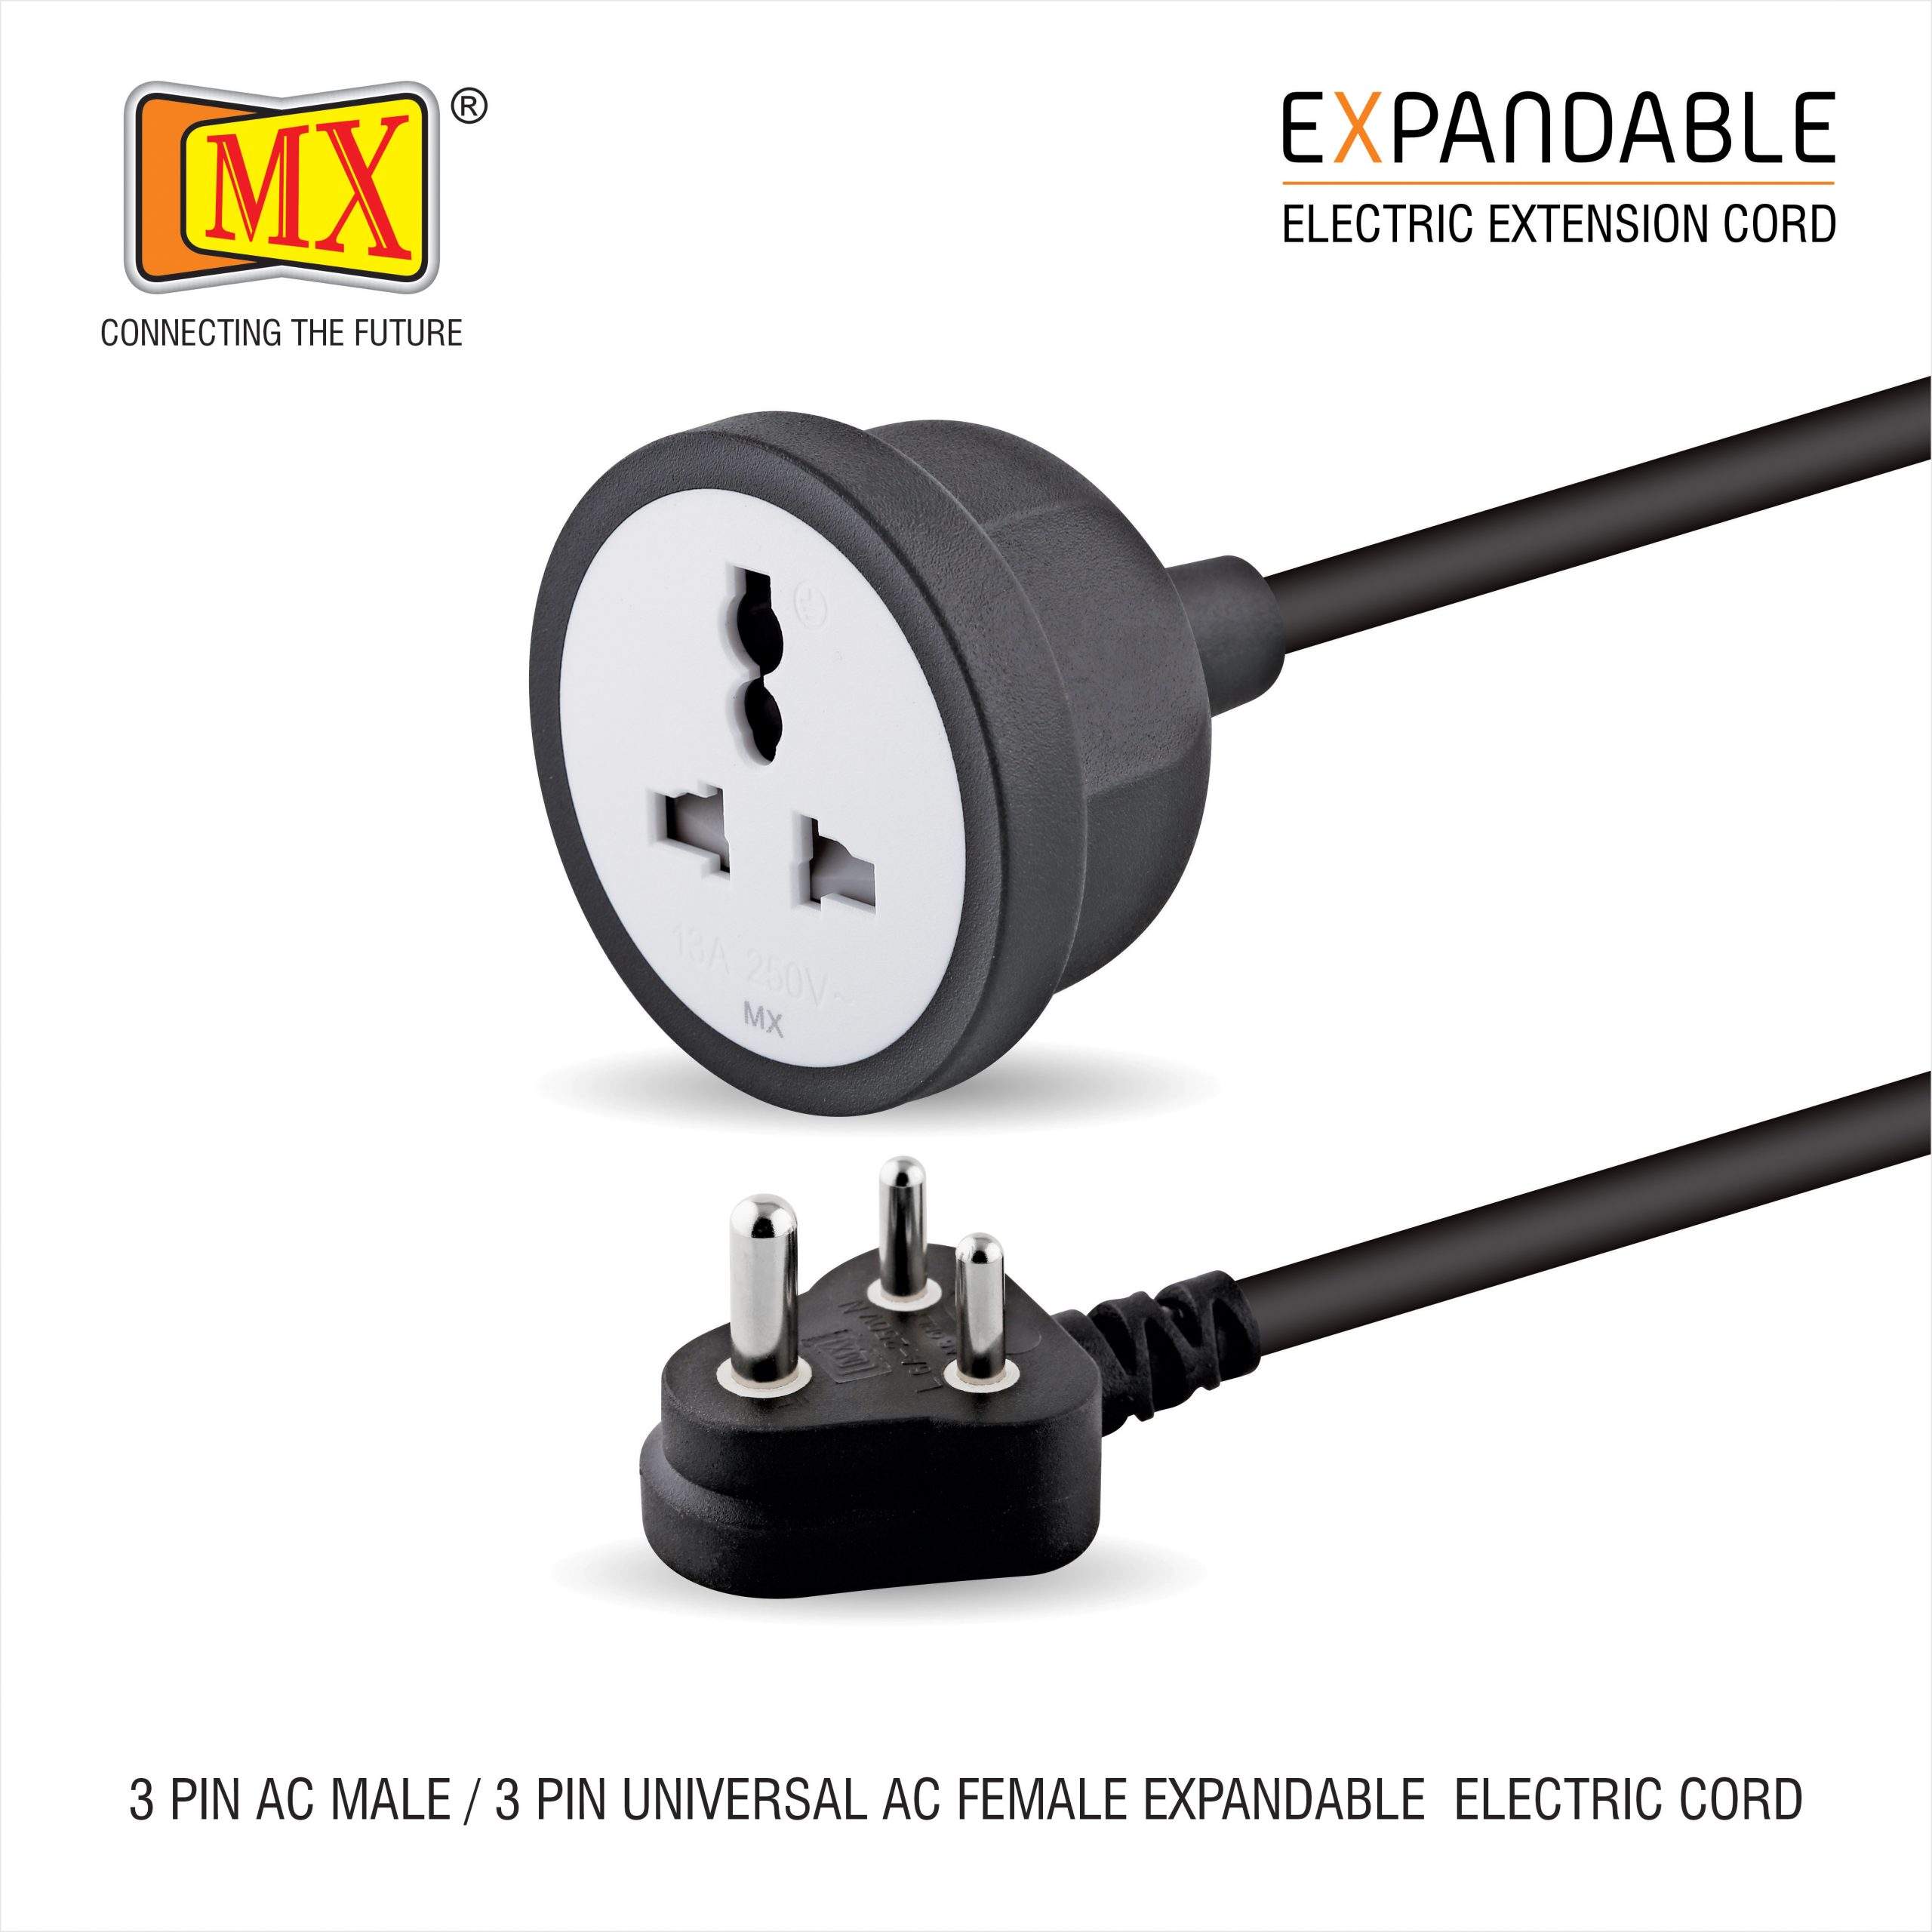 MX Extension Board with 3M Heavy Duty Long Wire Cord, Single Outlet Socket  2500W 10A Expandable Electric Extension, 3 Pin Plug with Surge Protection &  Child Safety Shutter, Black - MX MDR